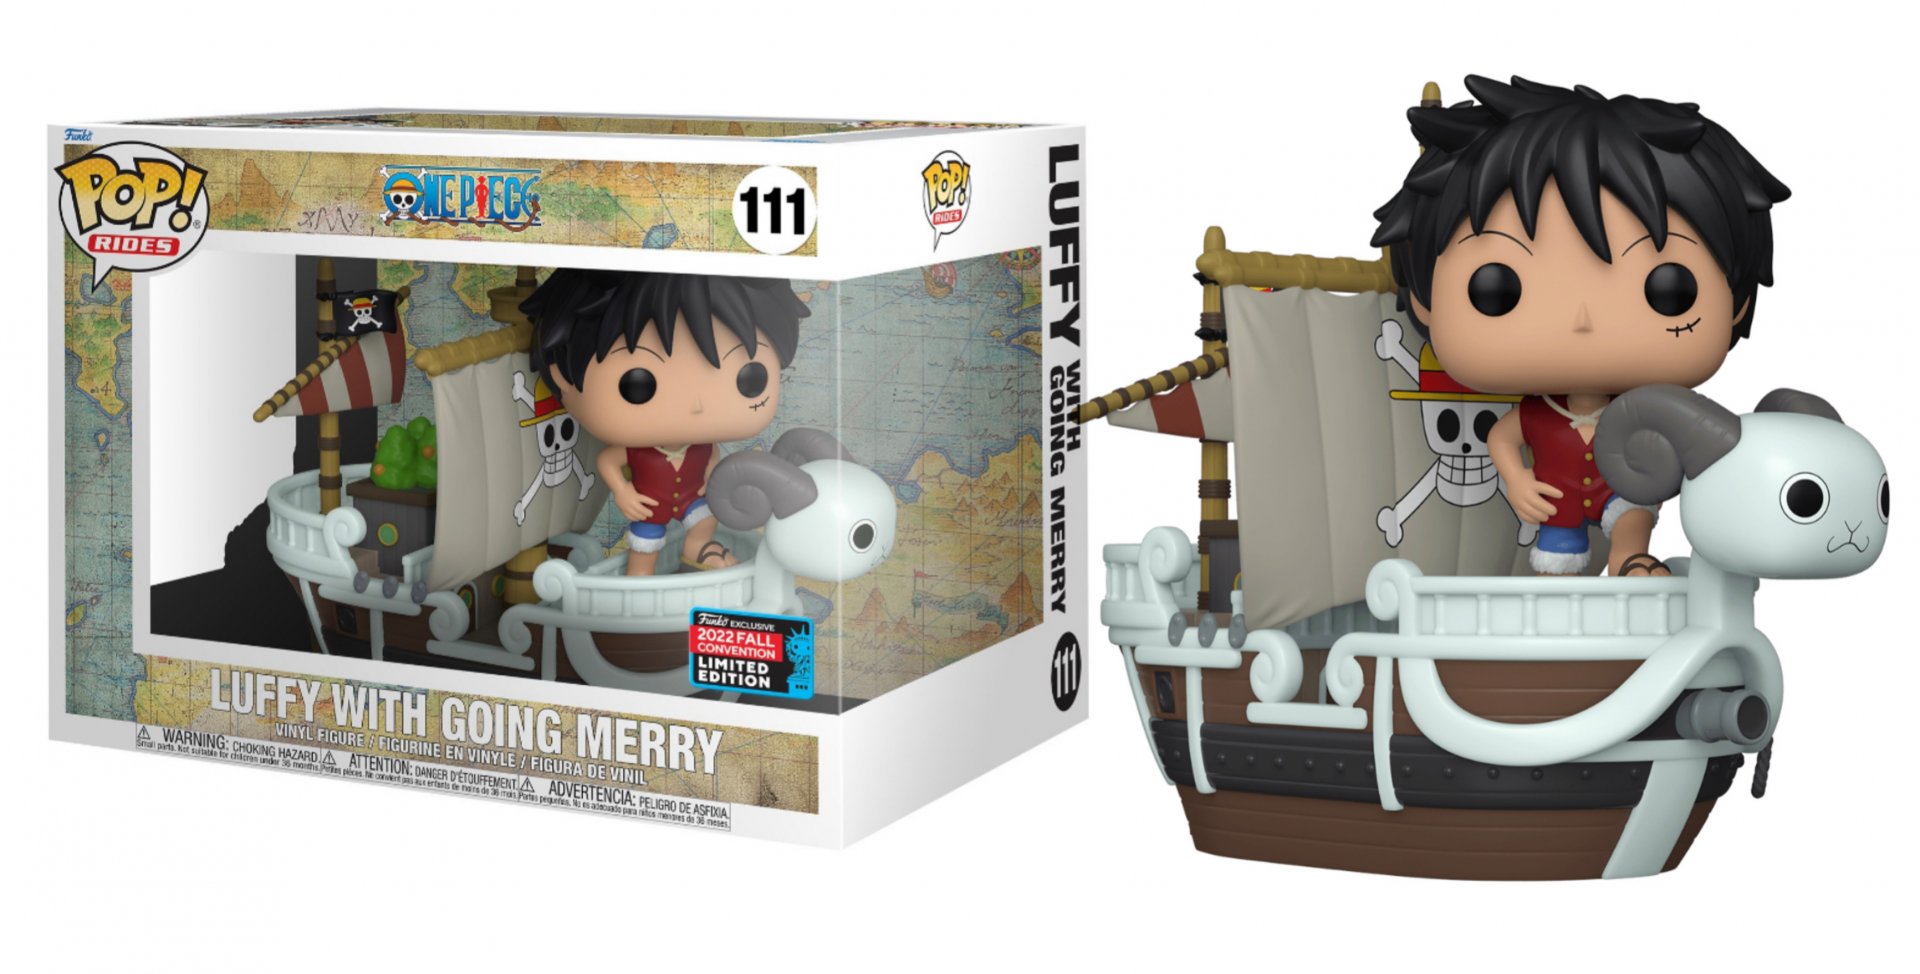 Funko Pop! Rides : One Piece : Luffy with Going Merry #111 เสาหัก 2022 Fall Convention Comic Con